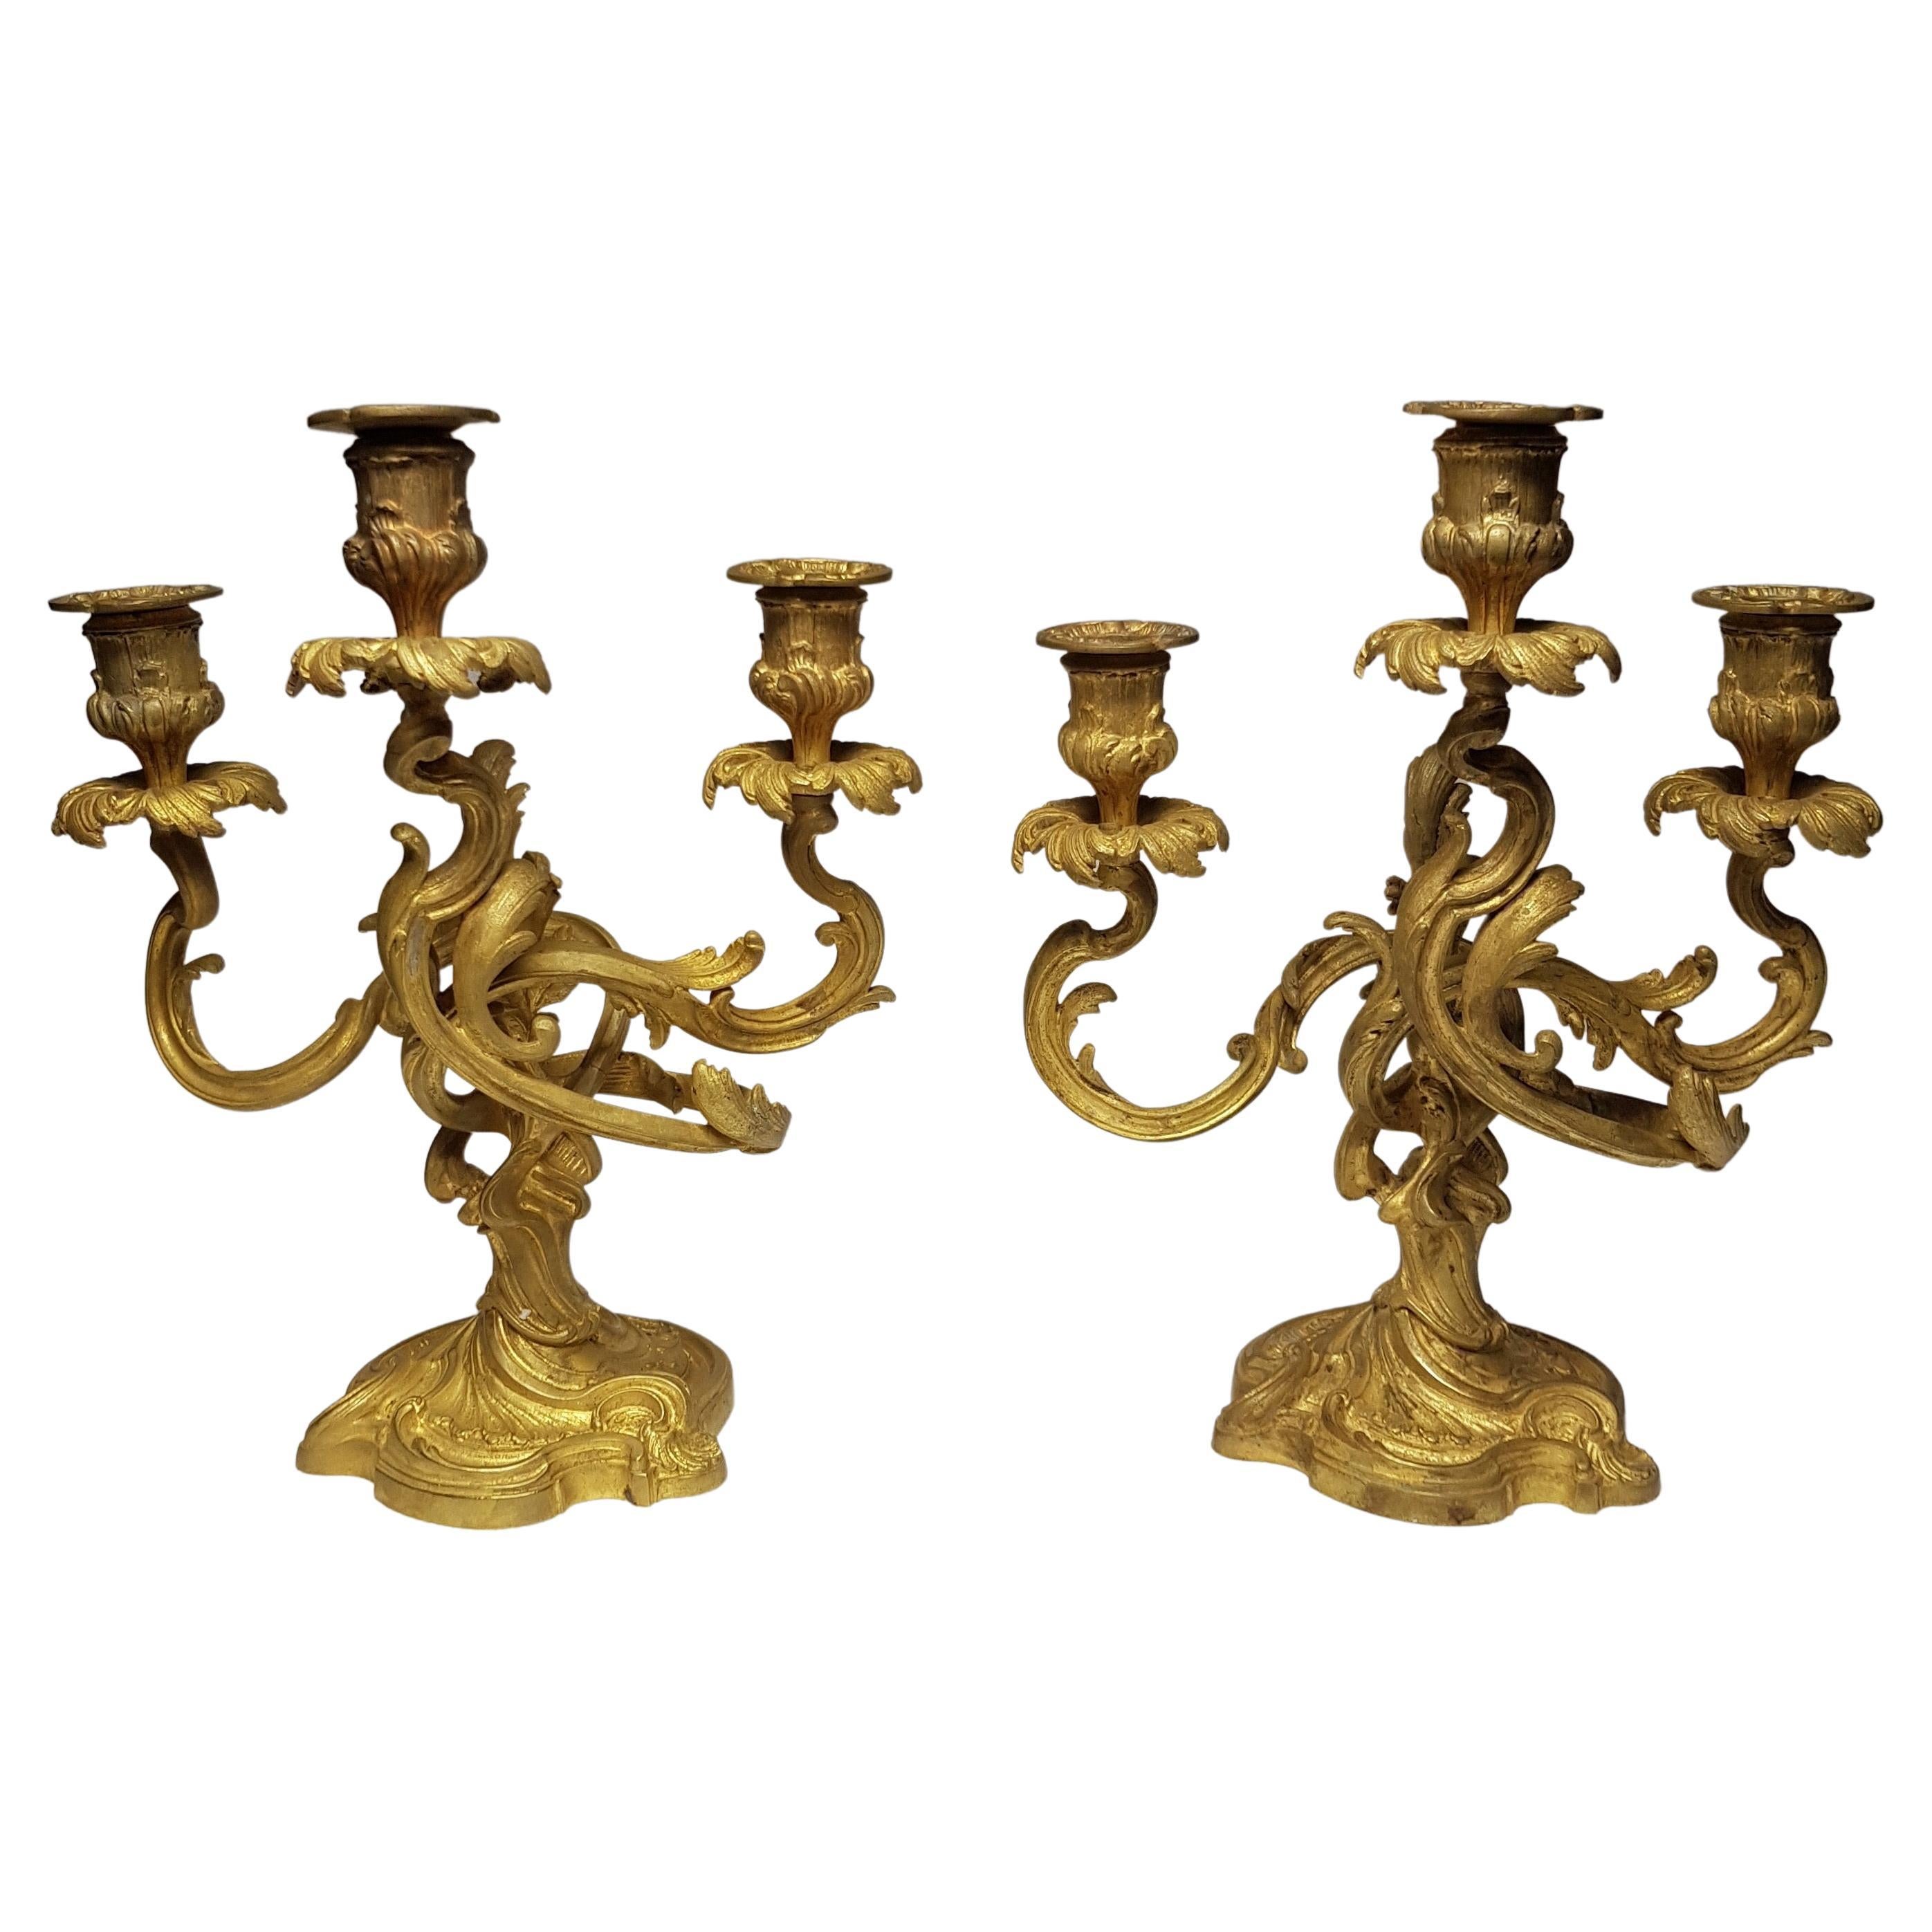 Majestic Brass Candlestick Pair, circa 1870 For Sale 12